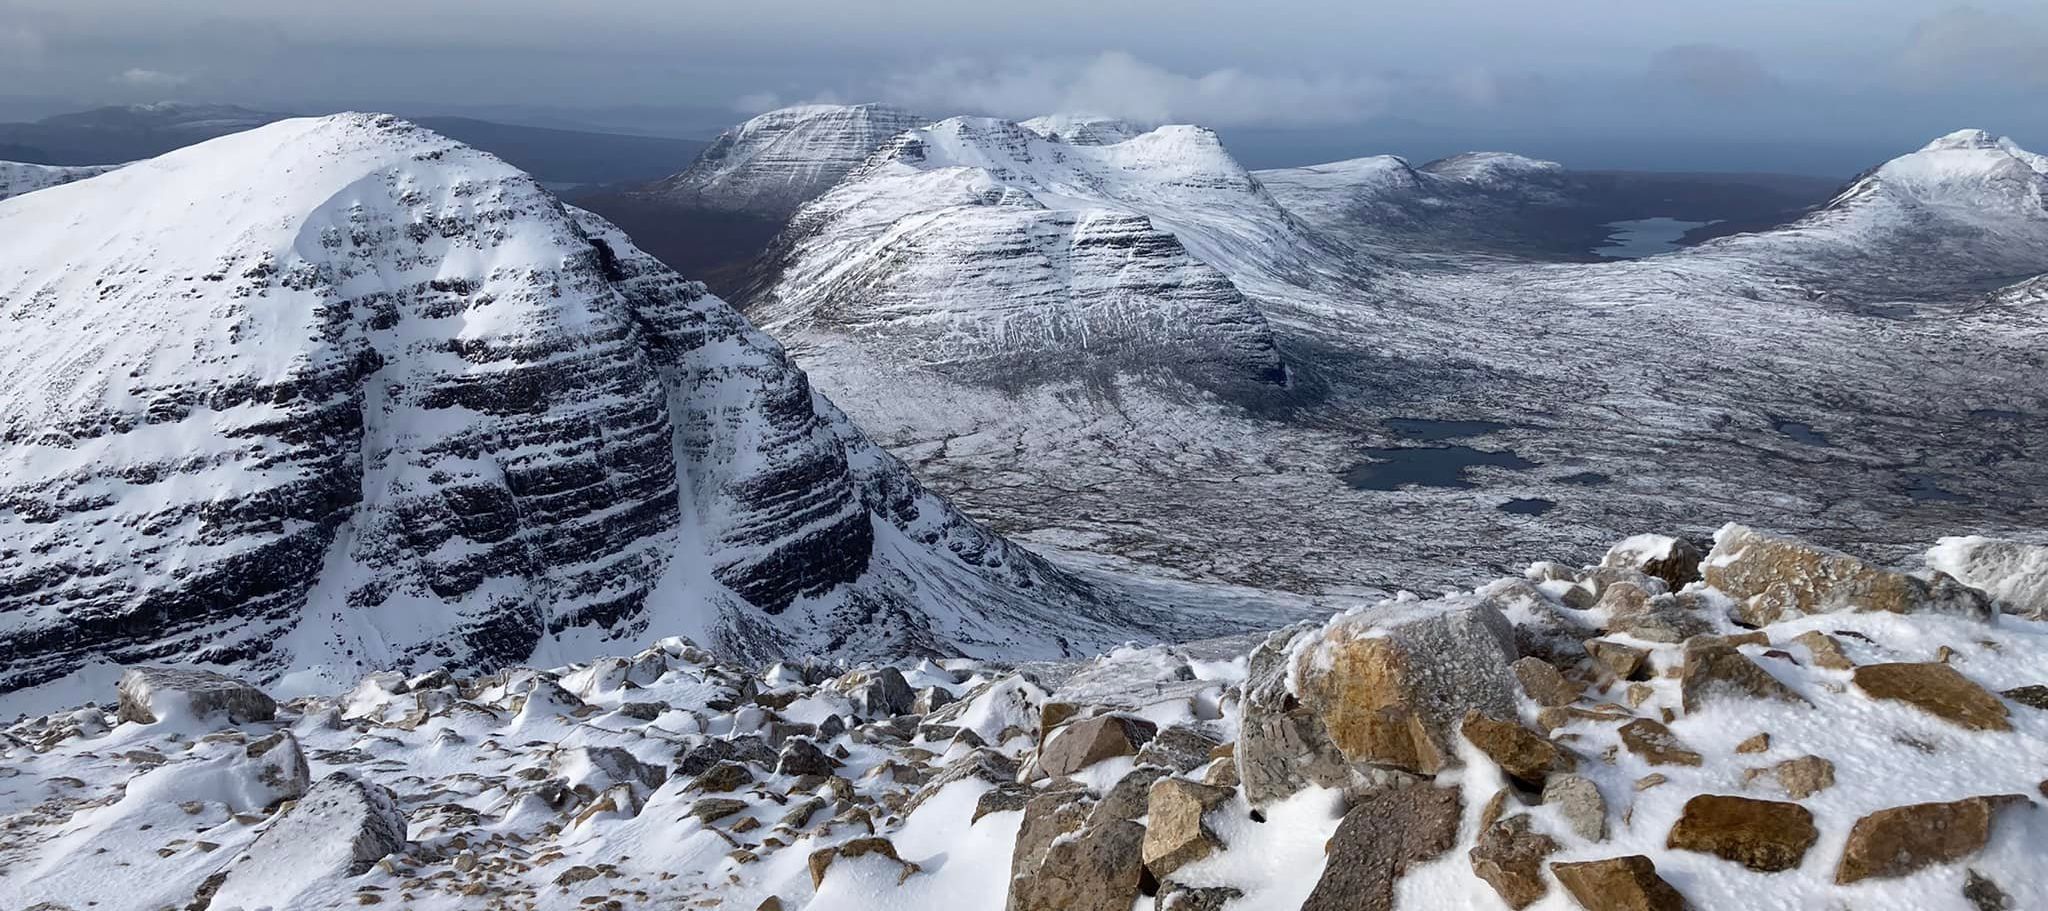 View from Beinn Eighe in the Torridon Region of the NW Highlands of Scotland